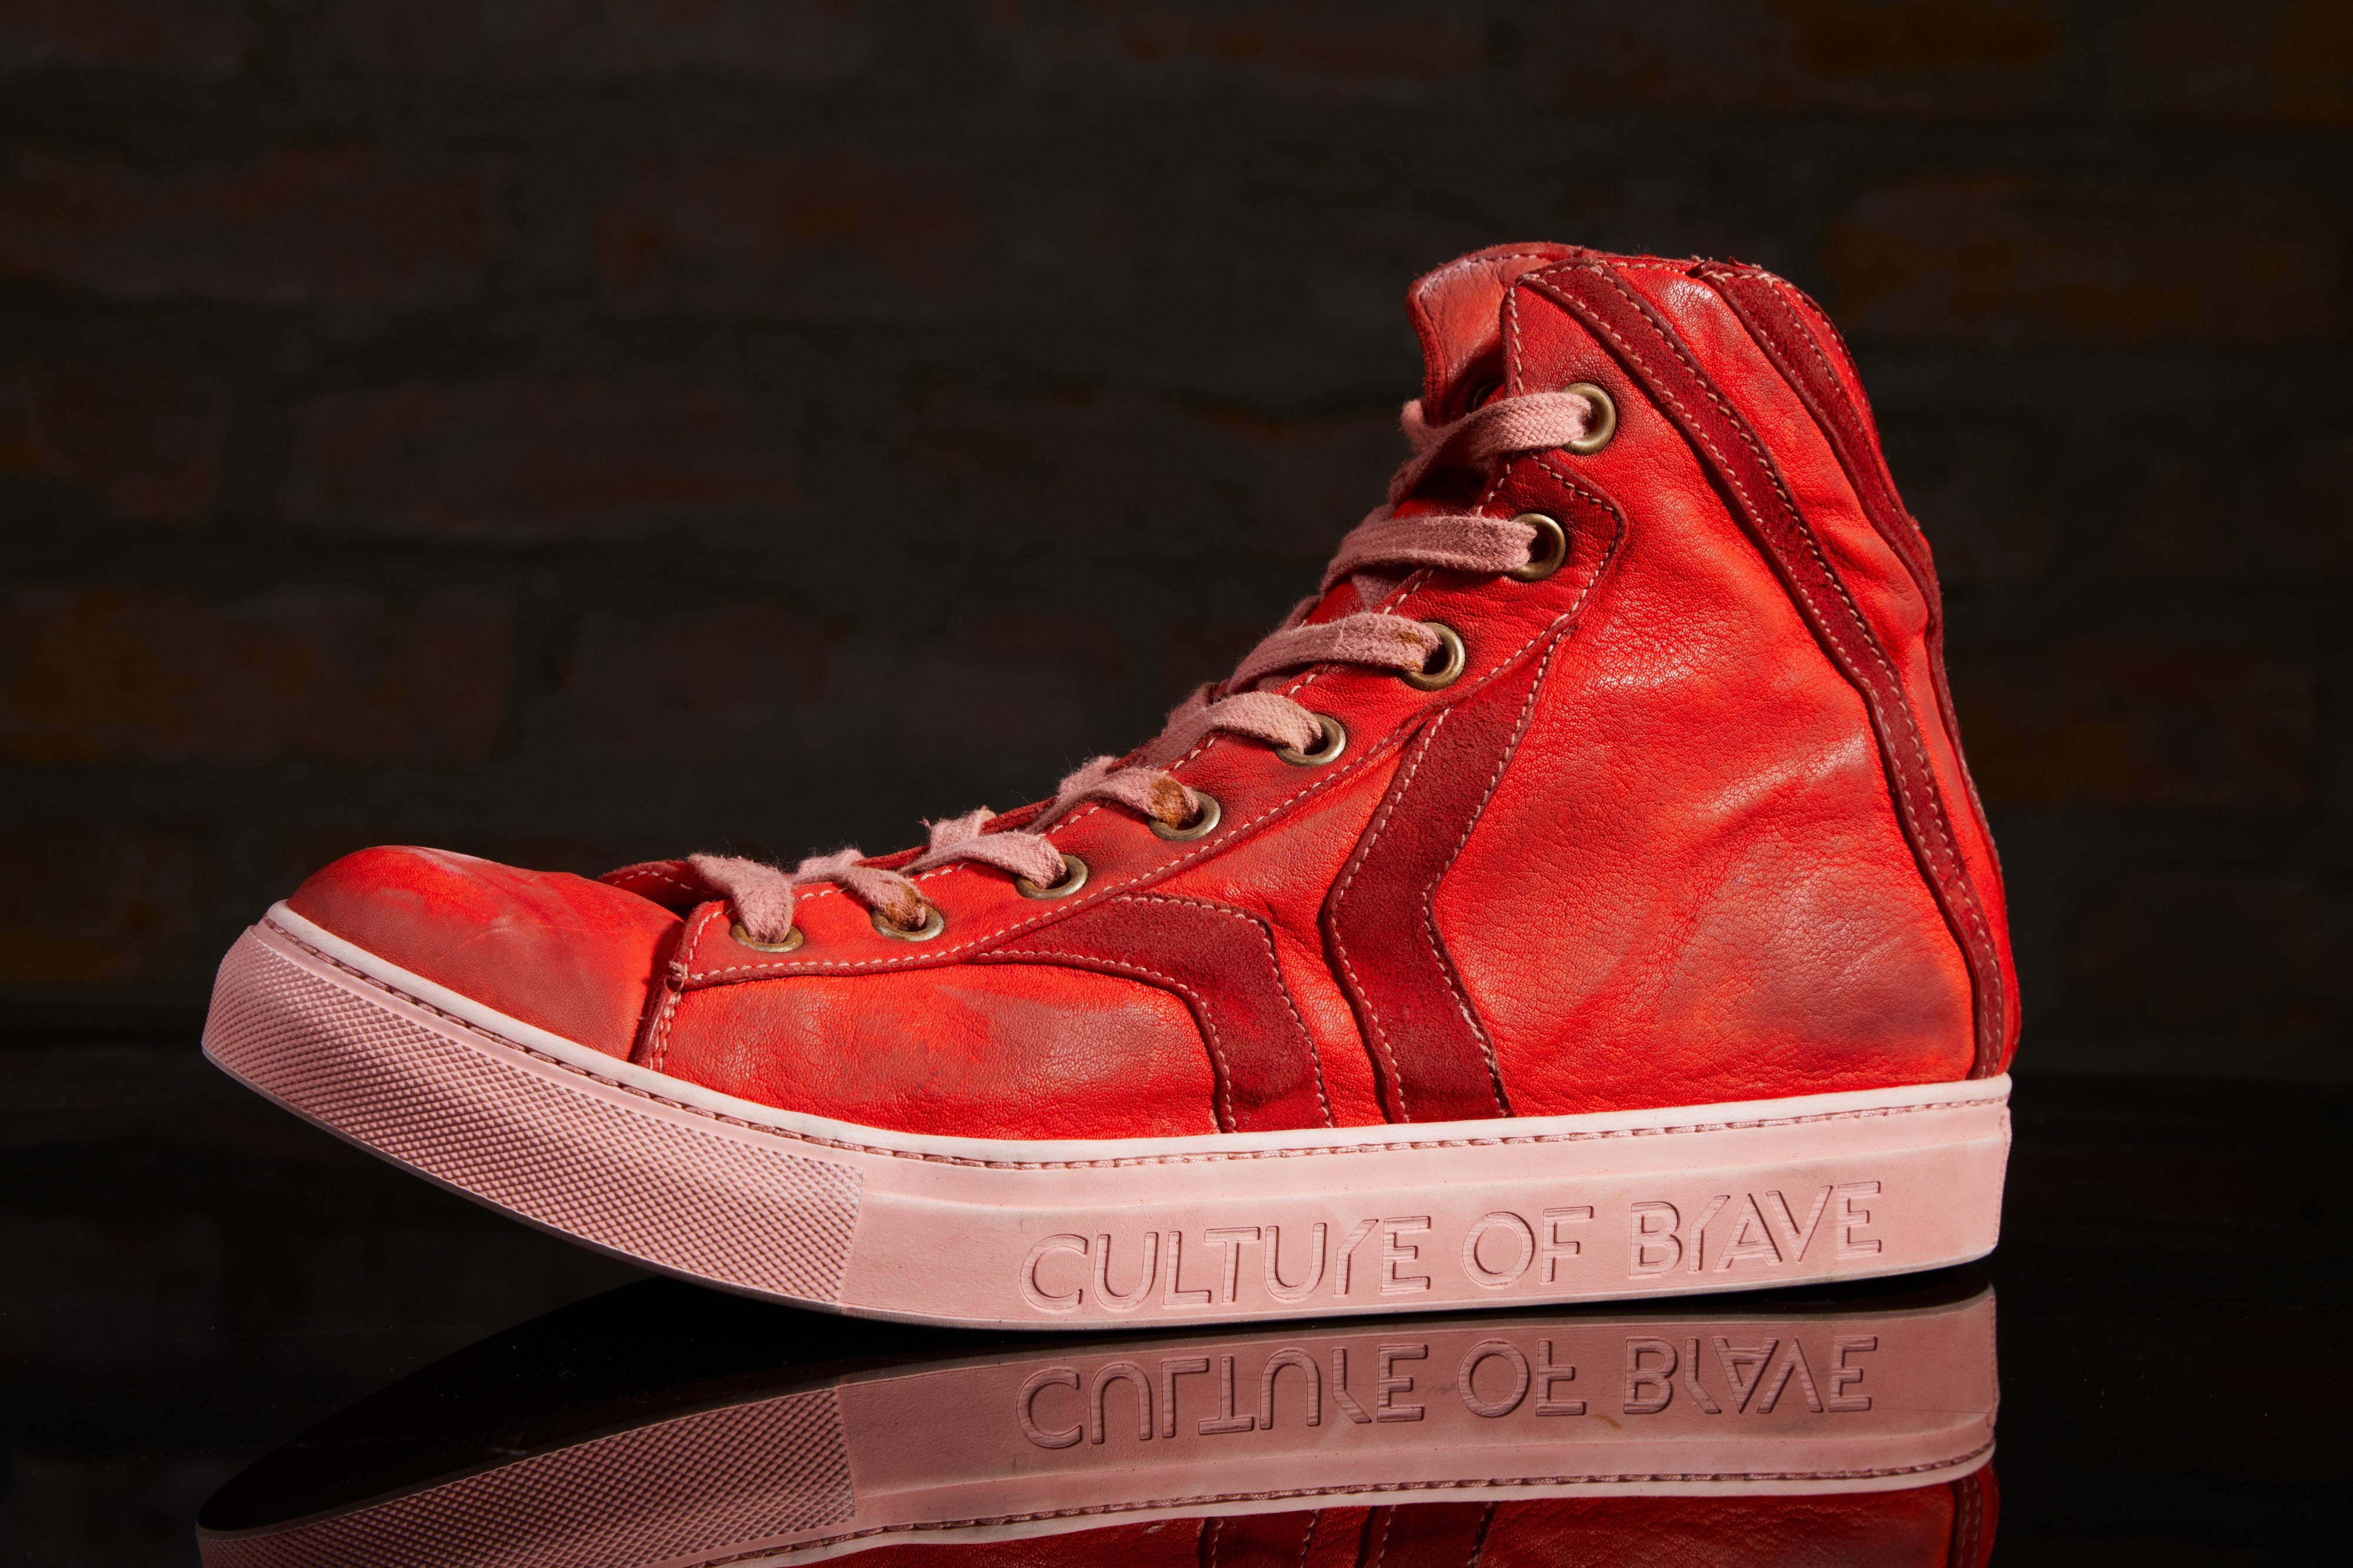 Individual Courage Red OD14 Women Mid Cut